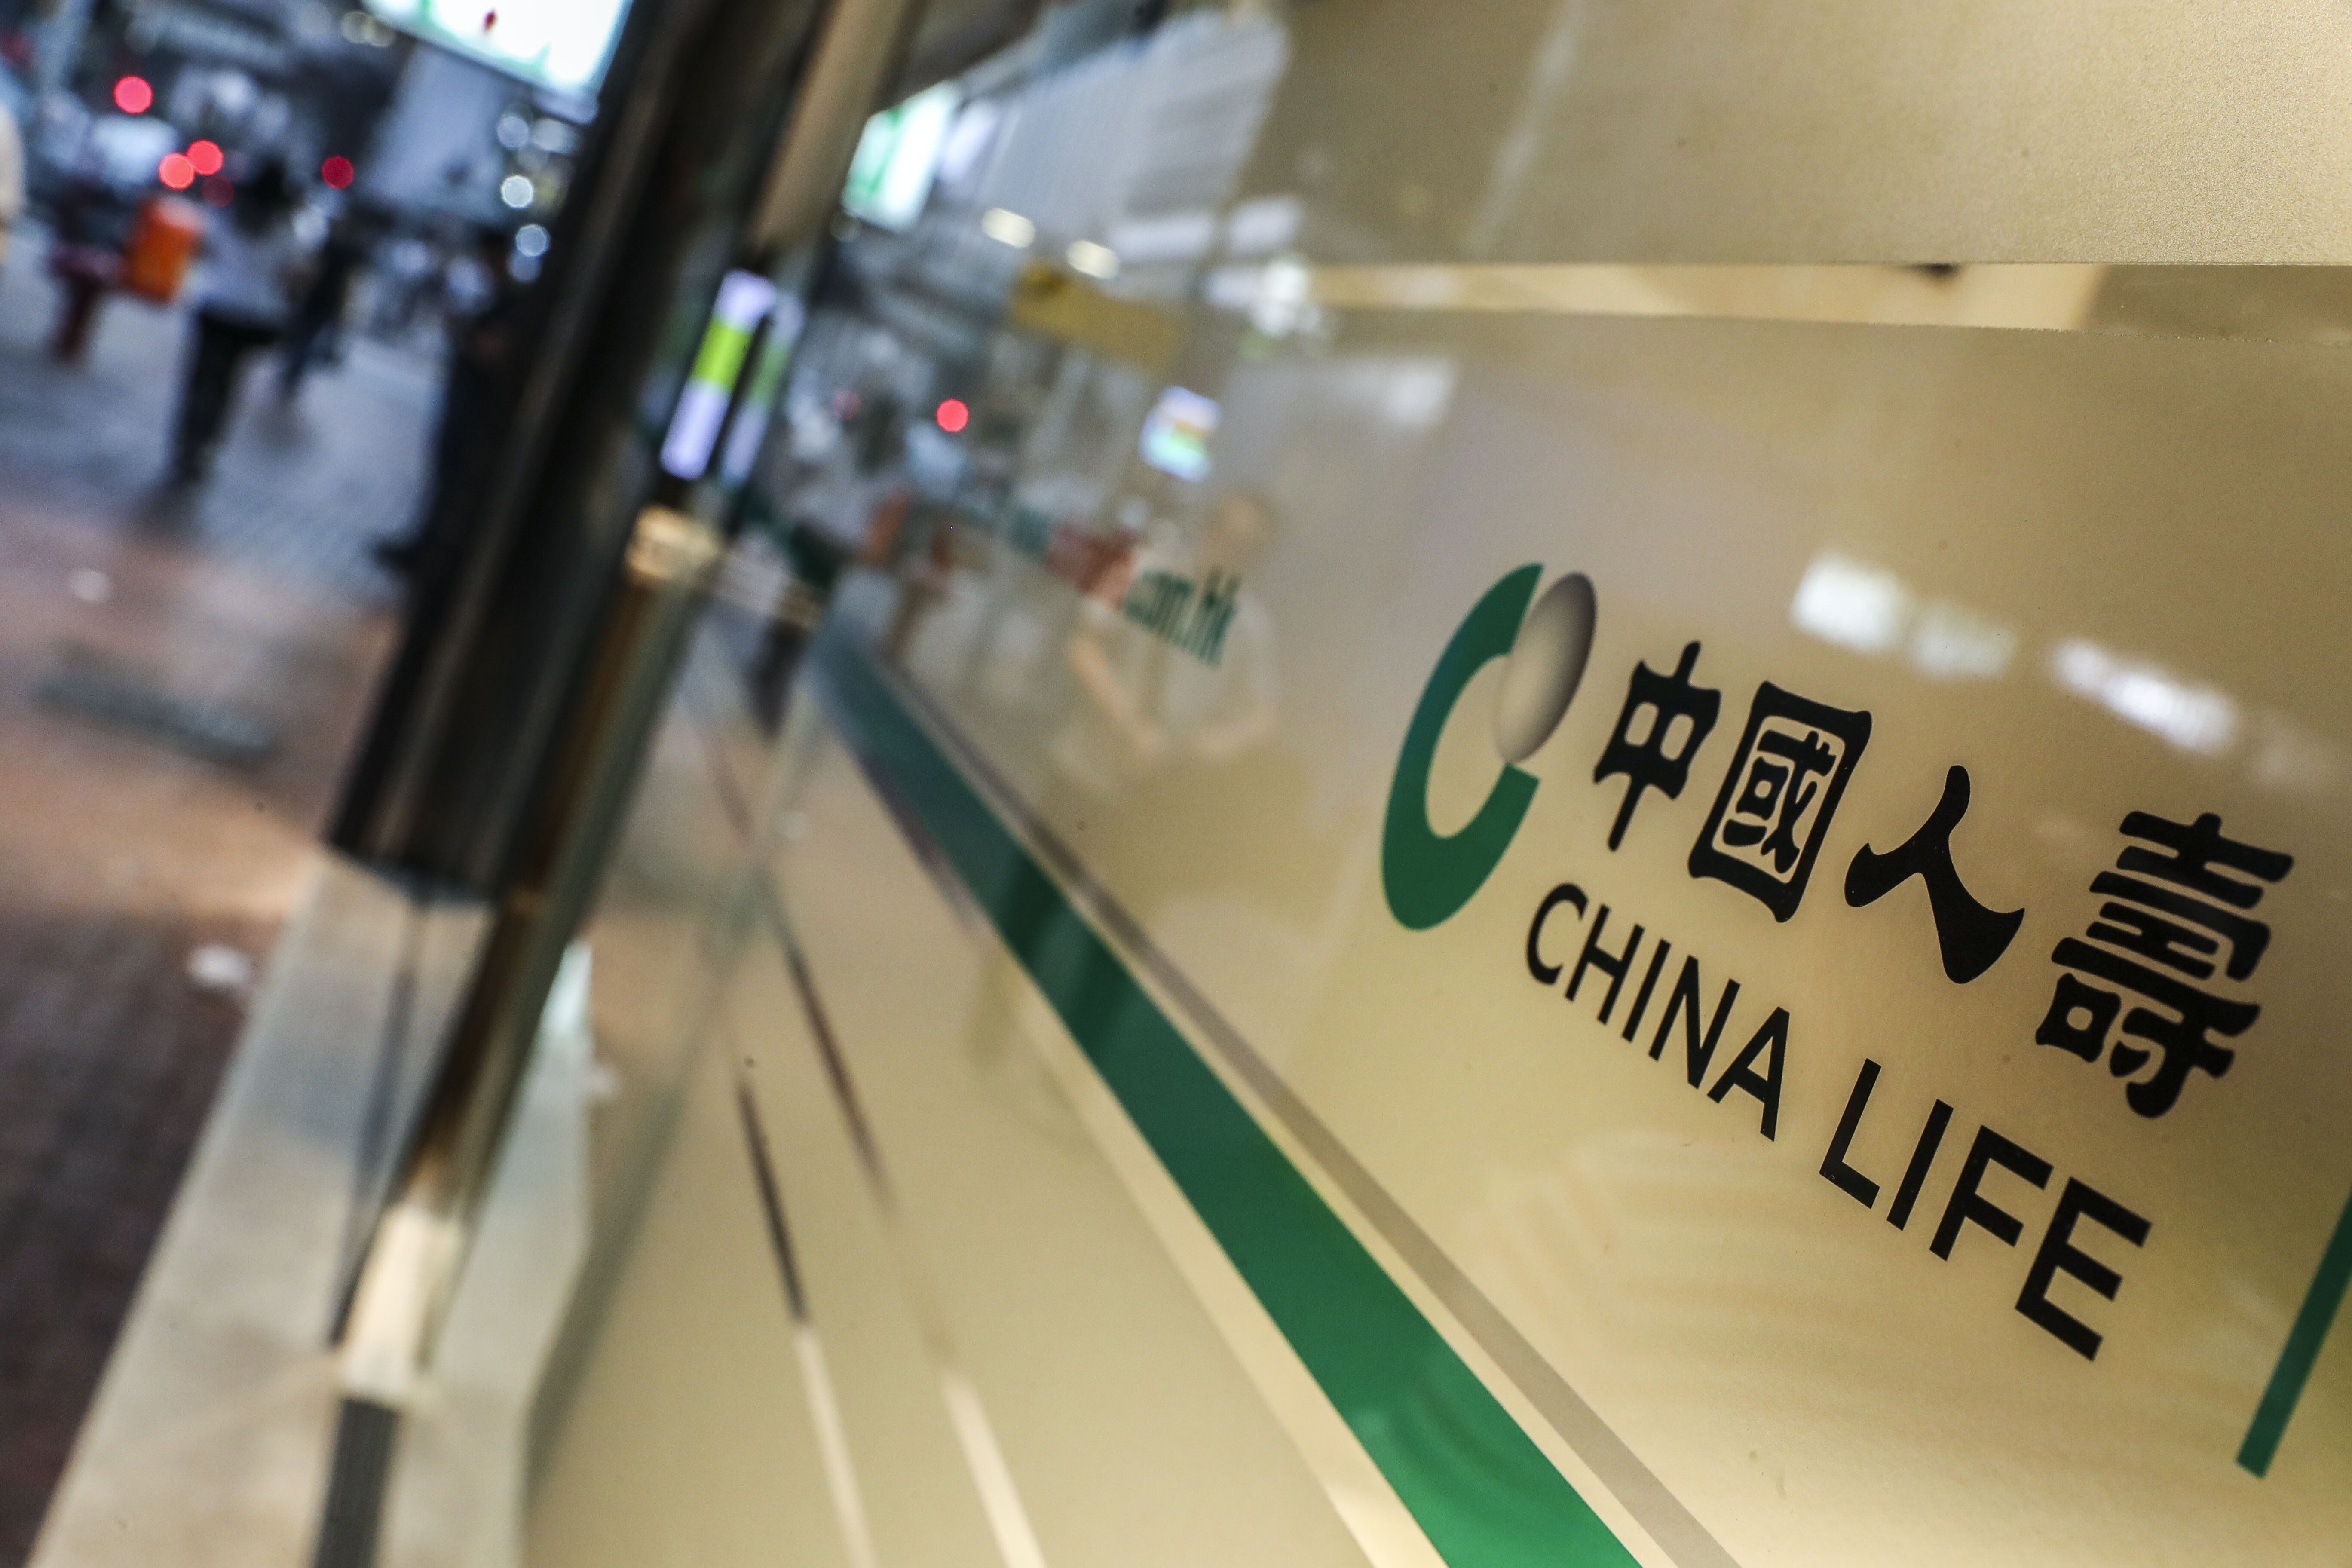 China Life said it will buy about 2 billion shares of China Guangfa Bank at about 8.81 yuan each. Photo: K. Y. Cheng